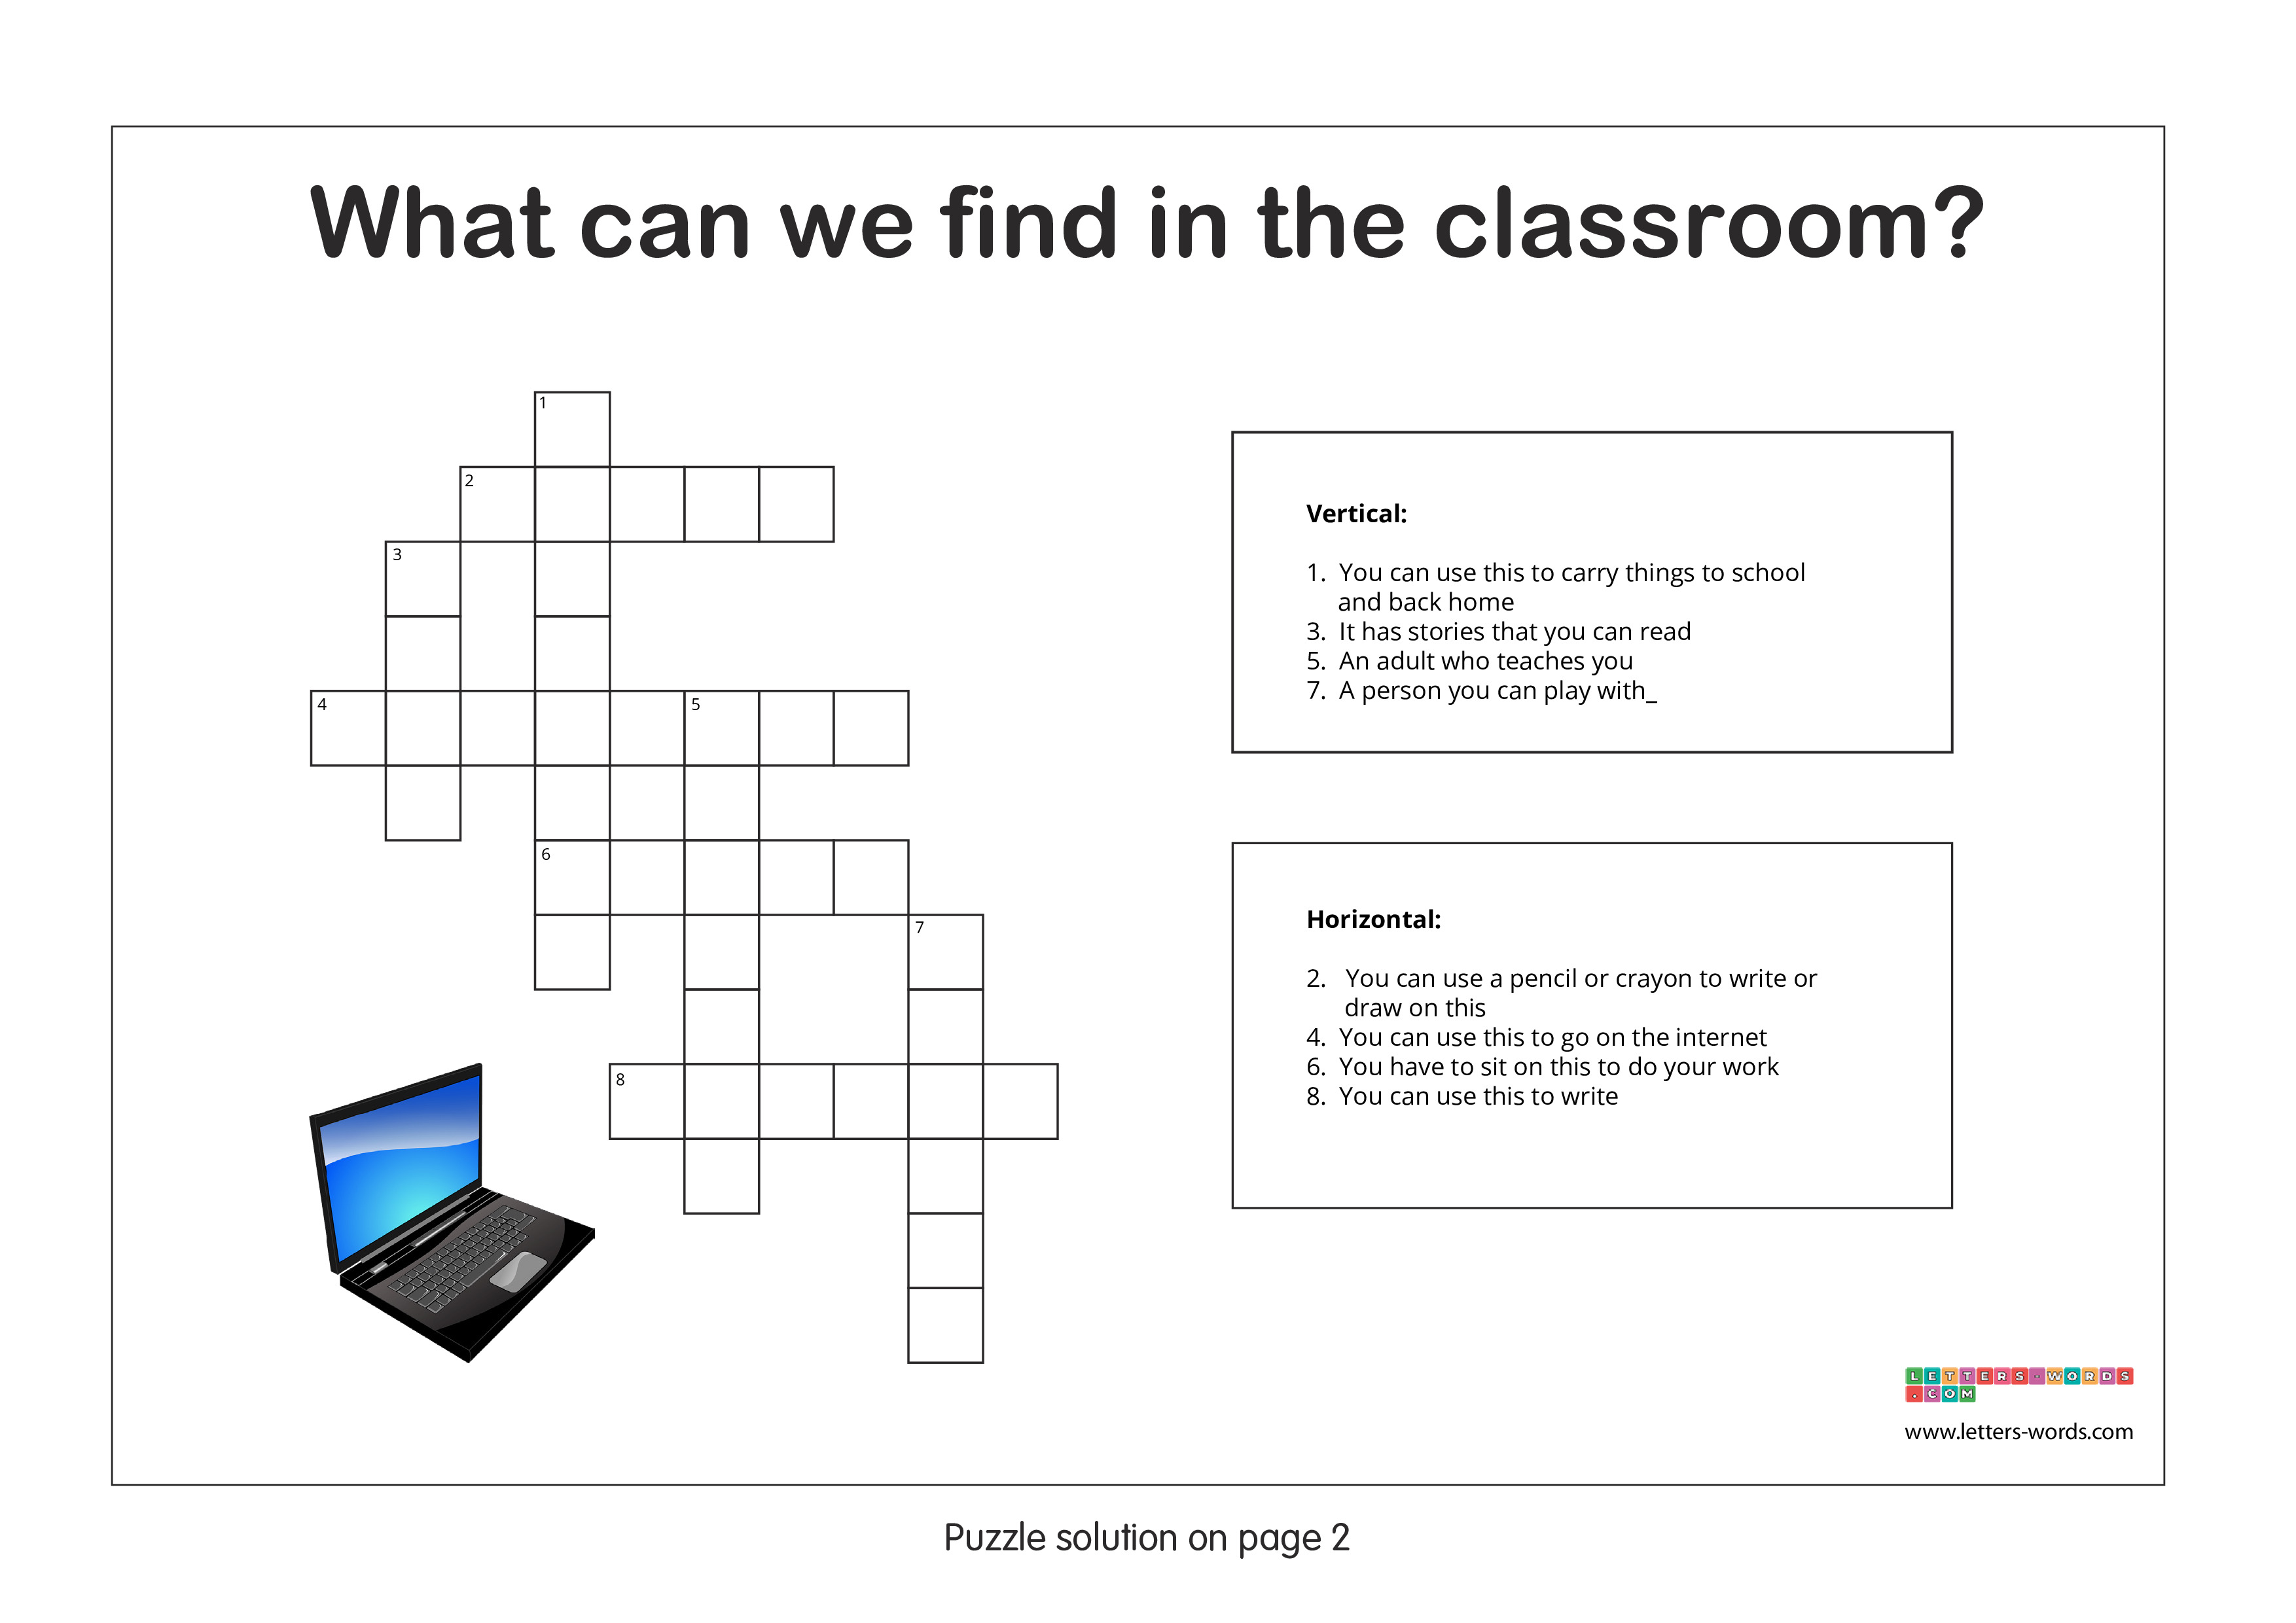 Elementary School Students Crossword Puzzle - What can we find in the classroom?